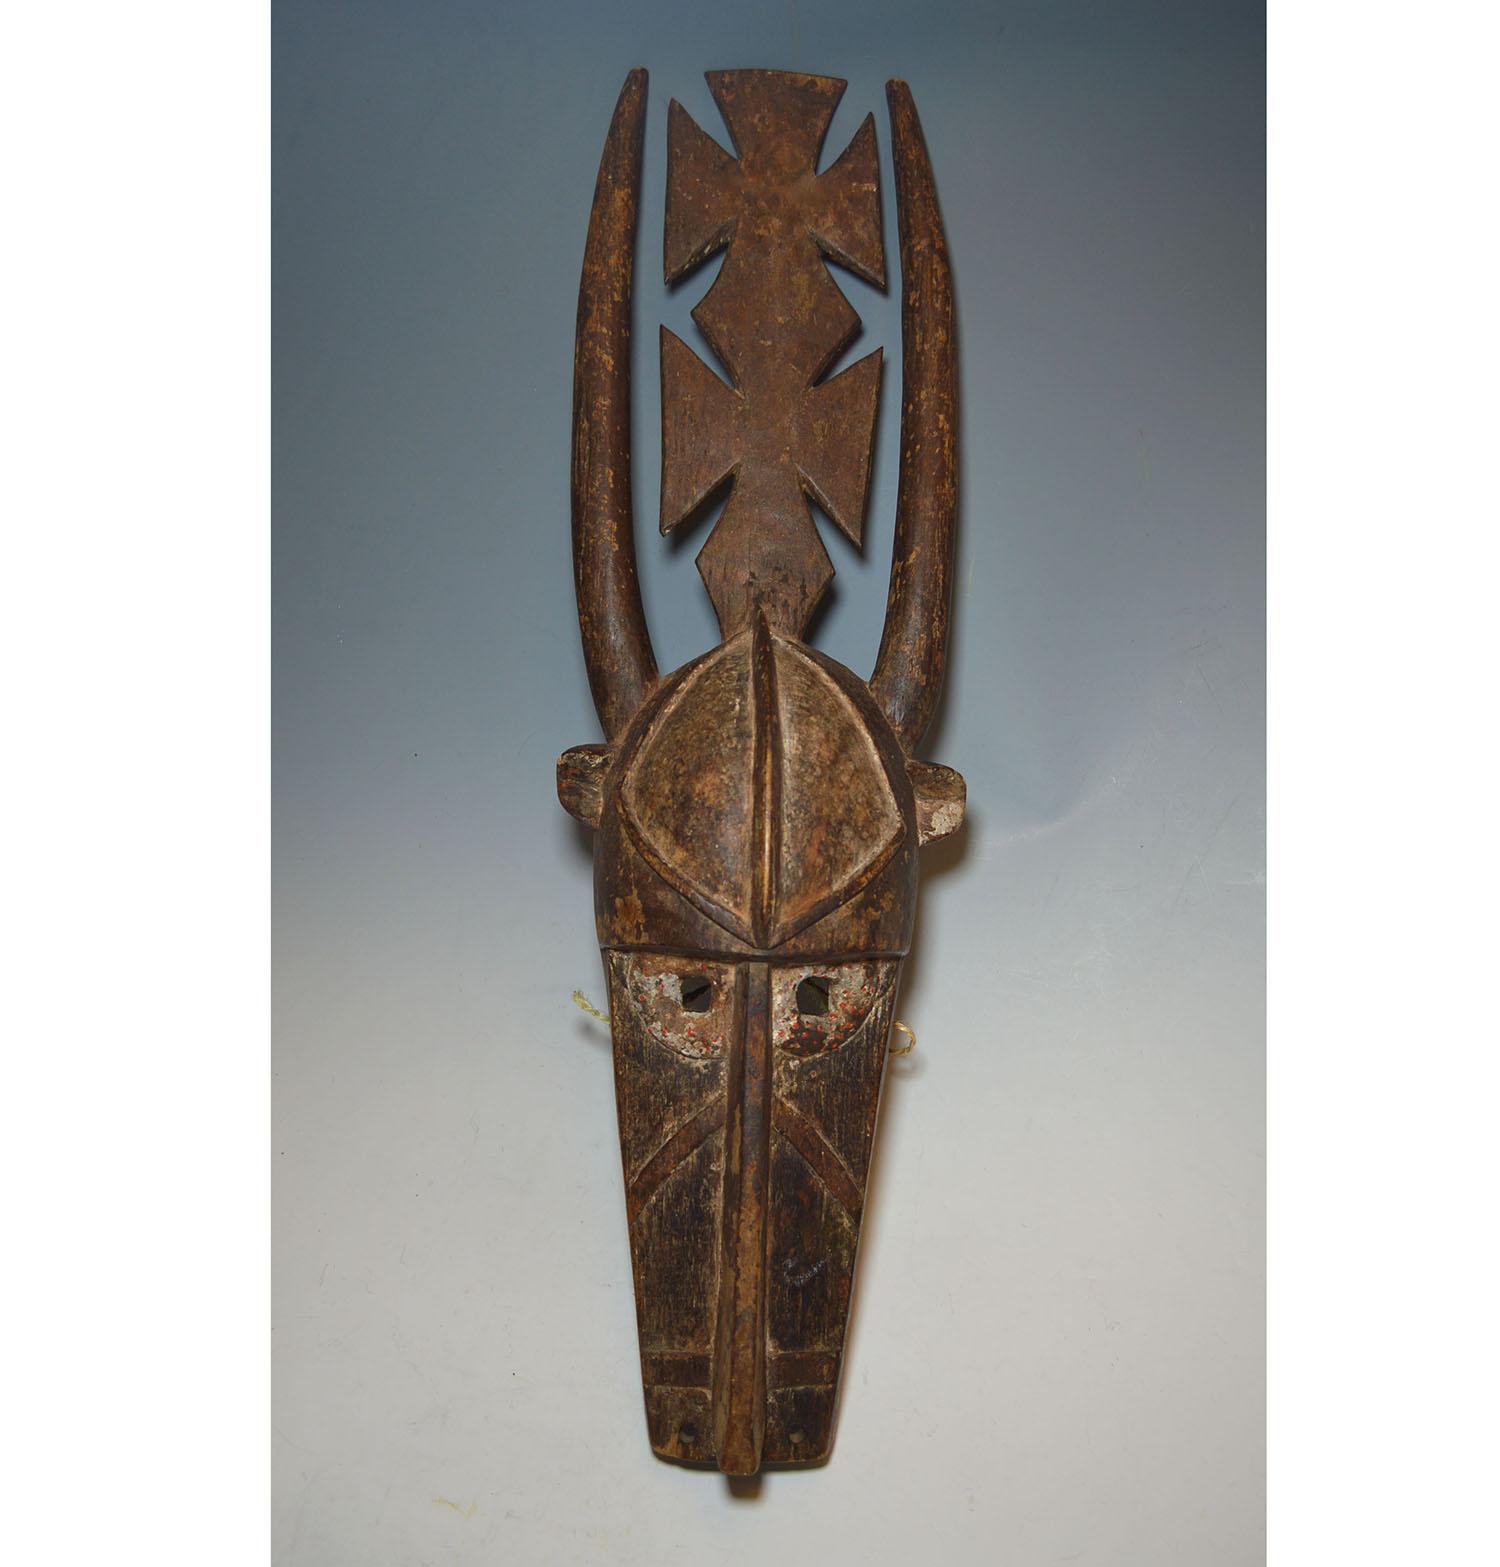 African Tribal Art impressive large old Mossi antelope mask

This is splendid very impressive Mossi antelope mask from Burkina Faso, a very large mask with cubist style facial features with large horns rising from the top. Remains of original